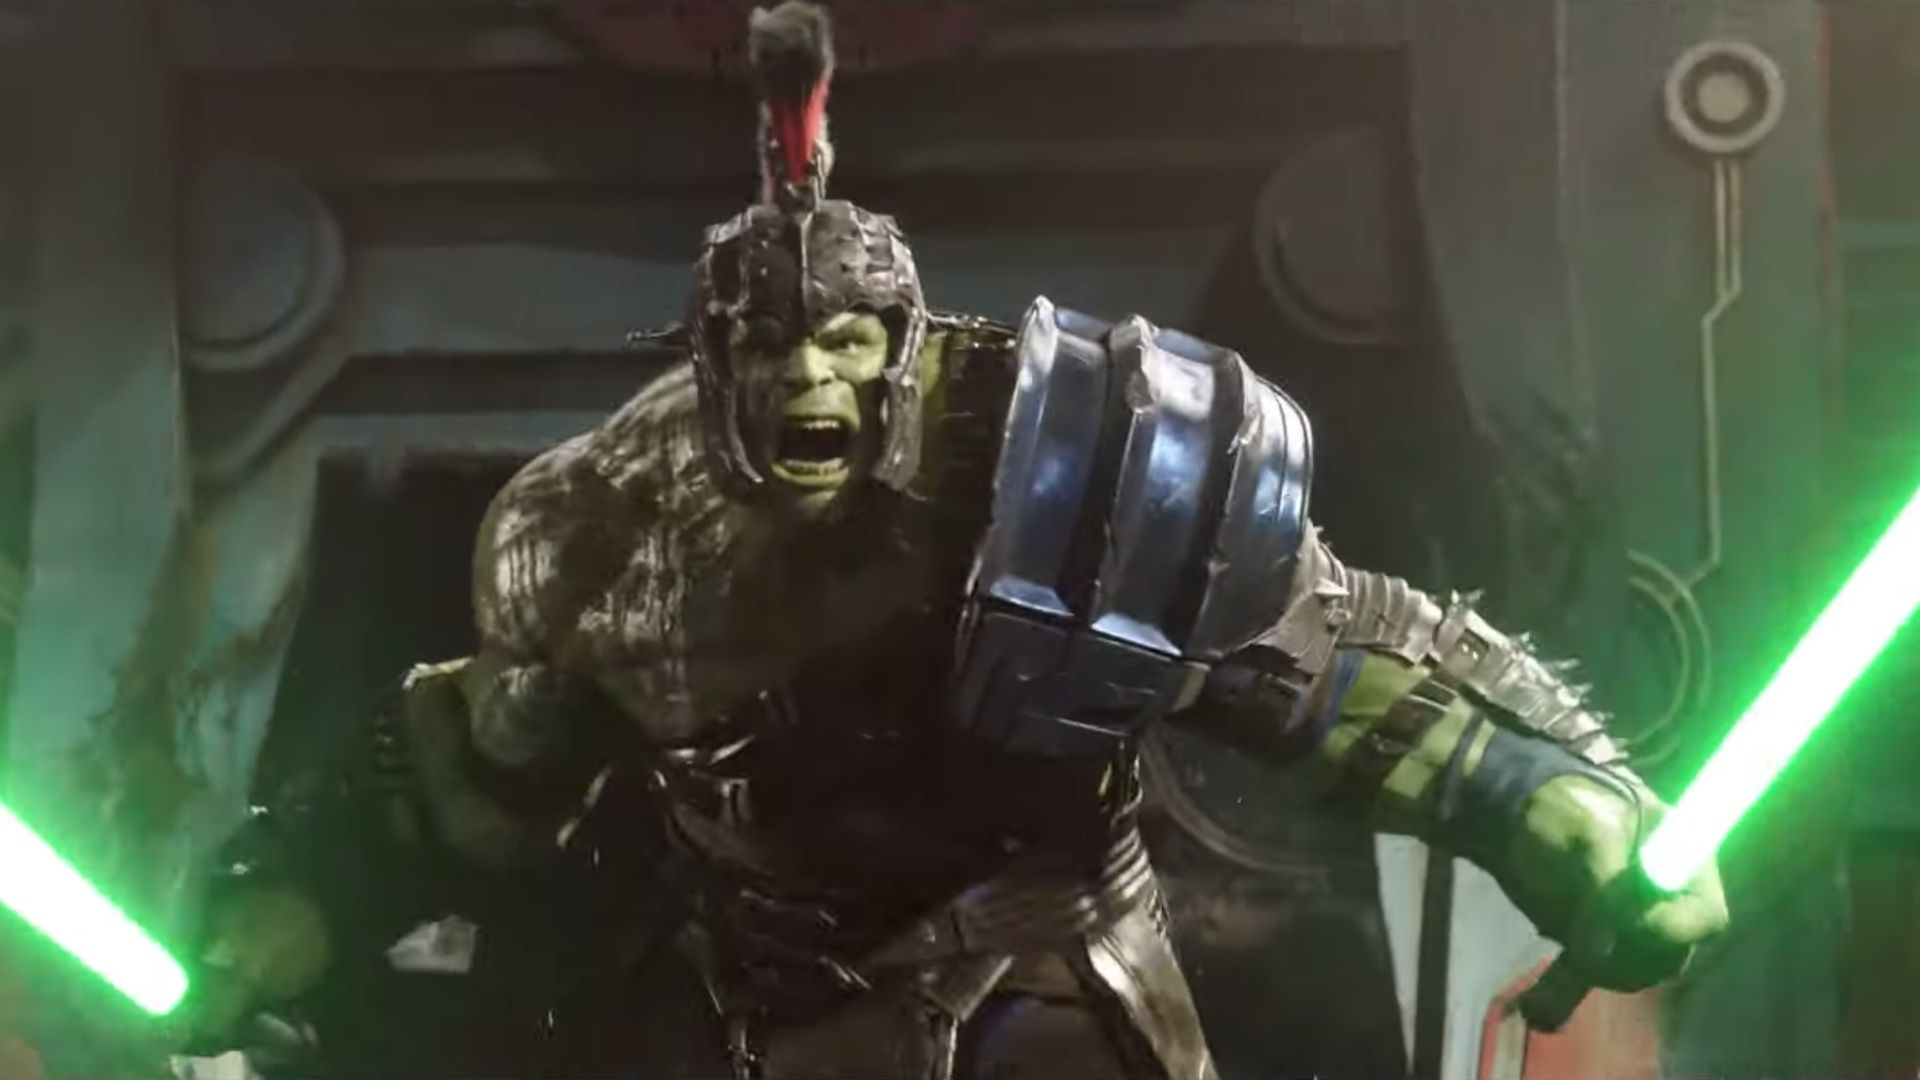 Thor And Hulk Battle With Lightsabers In Fan Made THOR: RAGNAROK